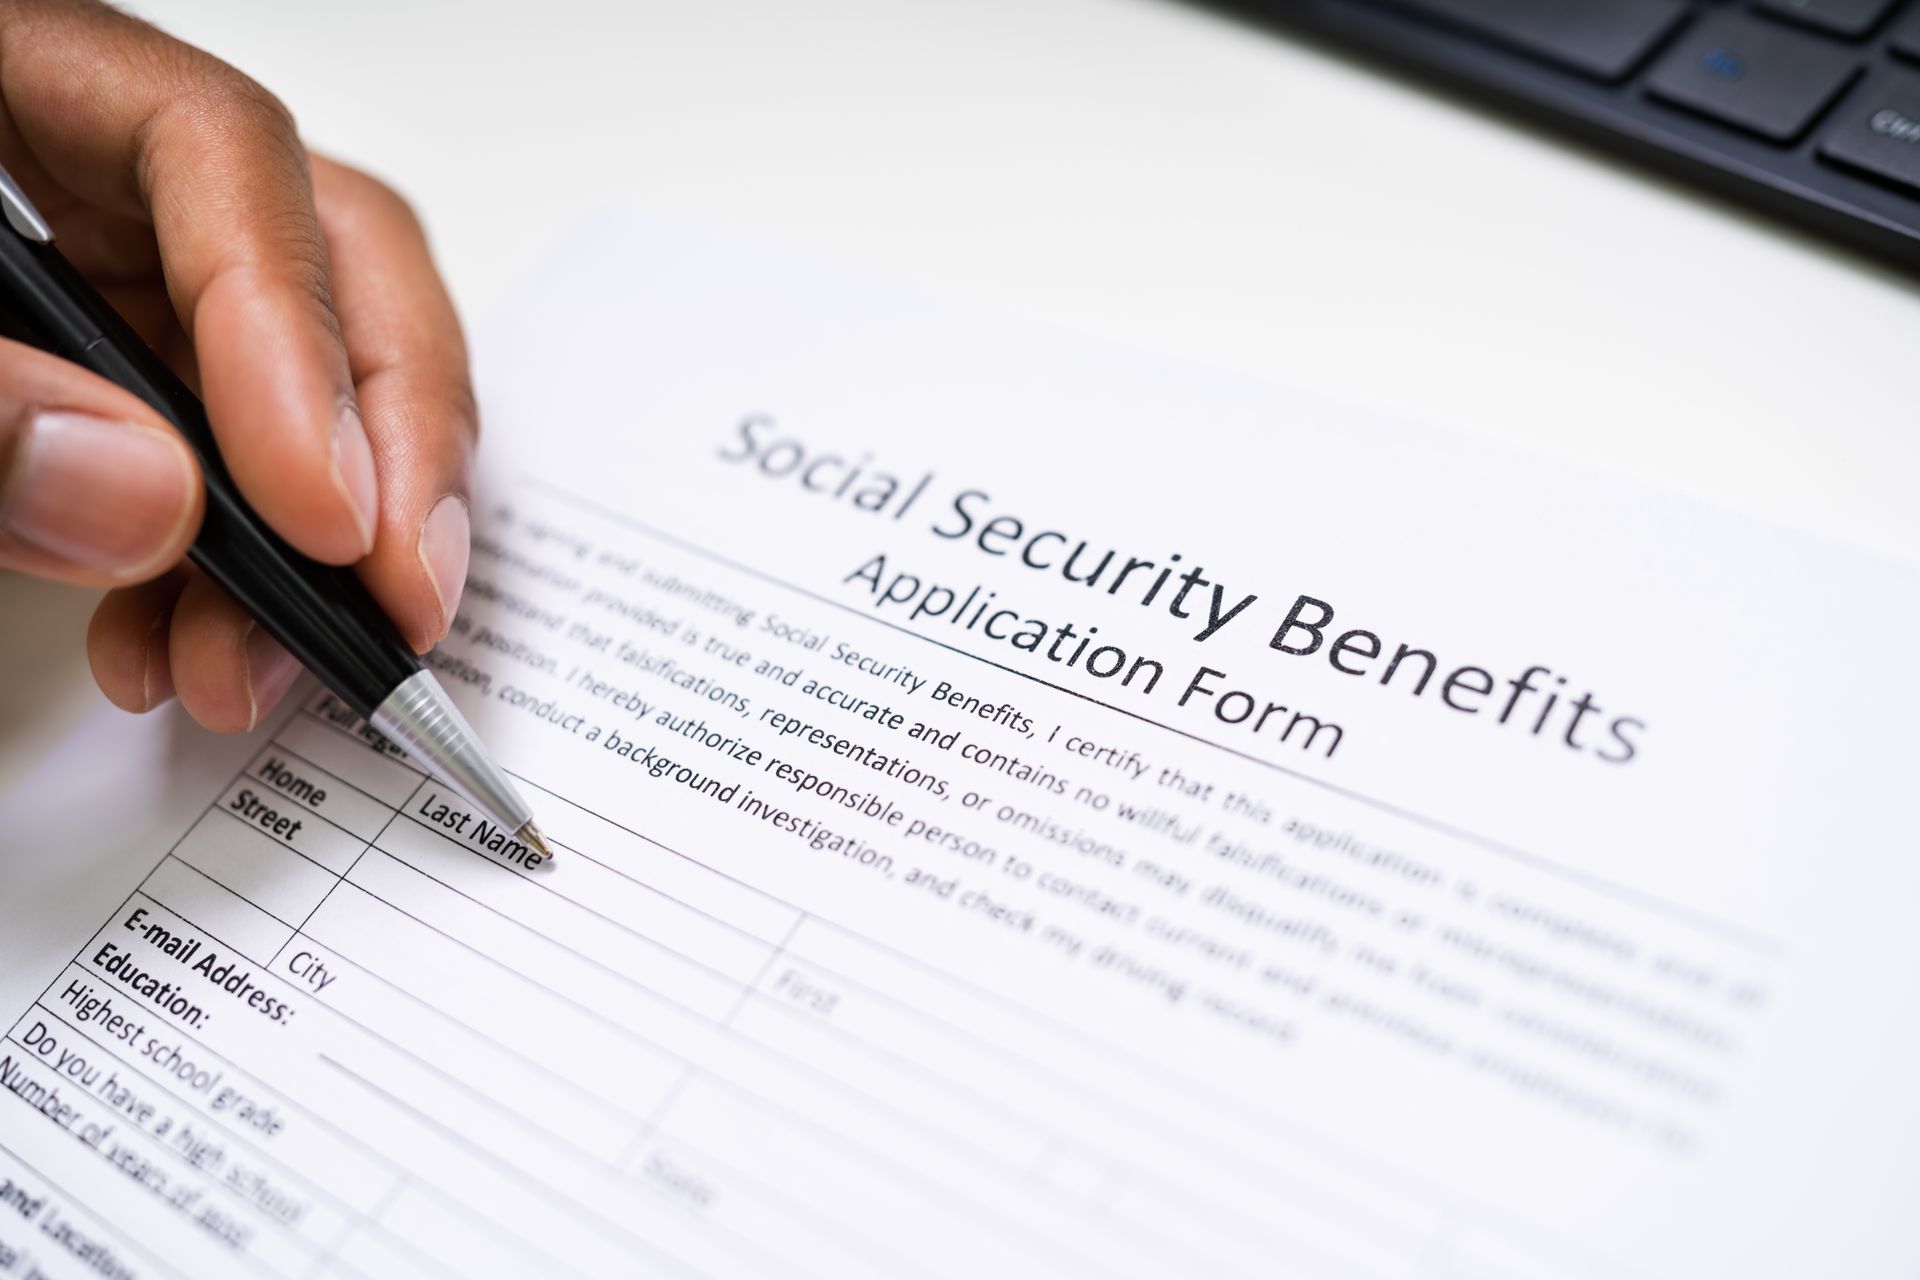 social security considered retirement income